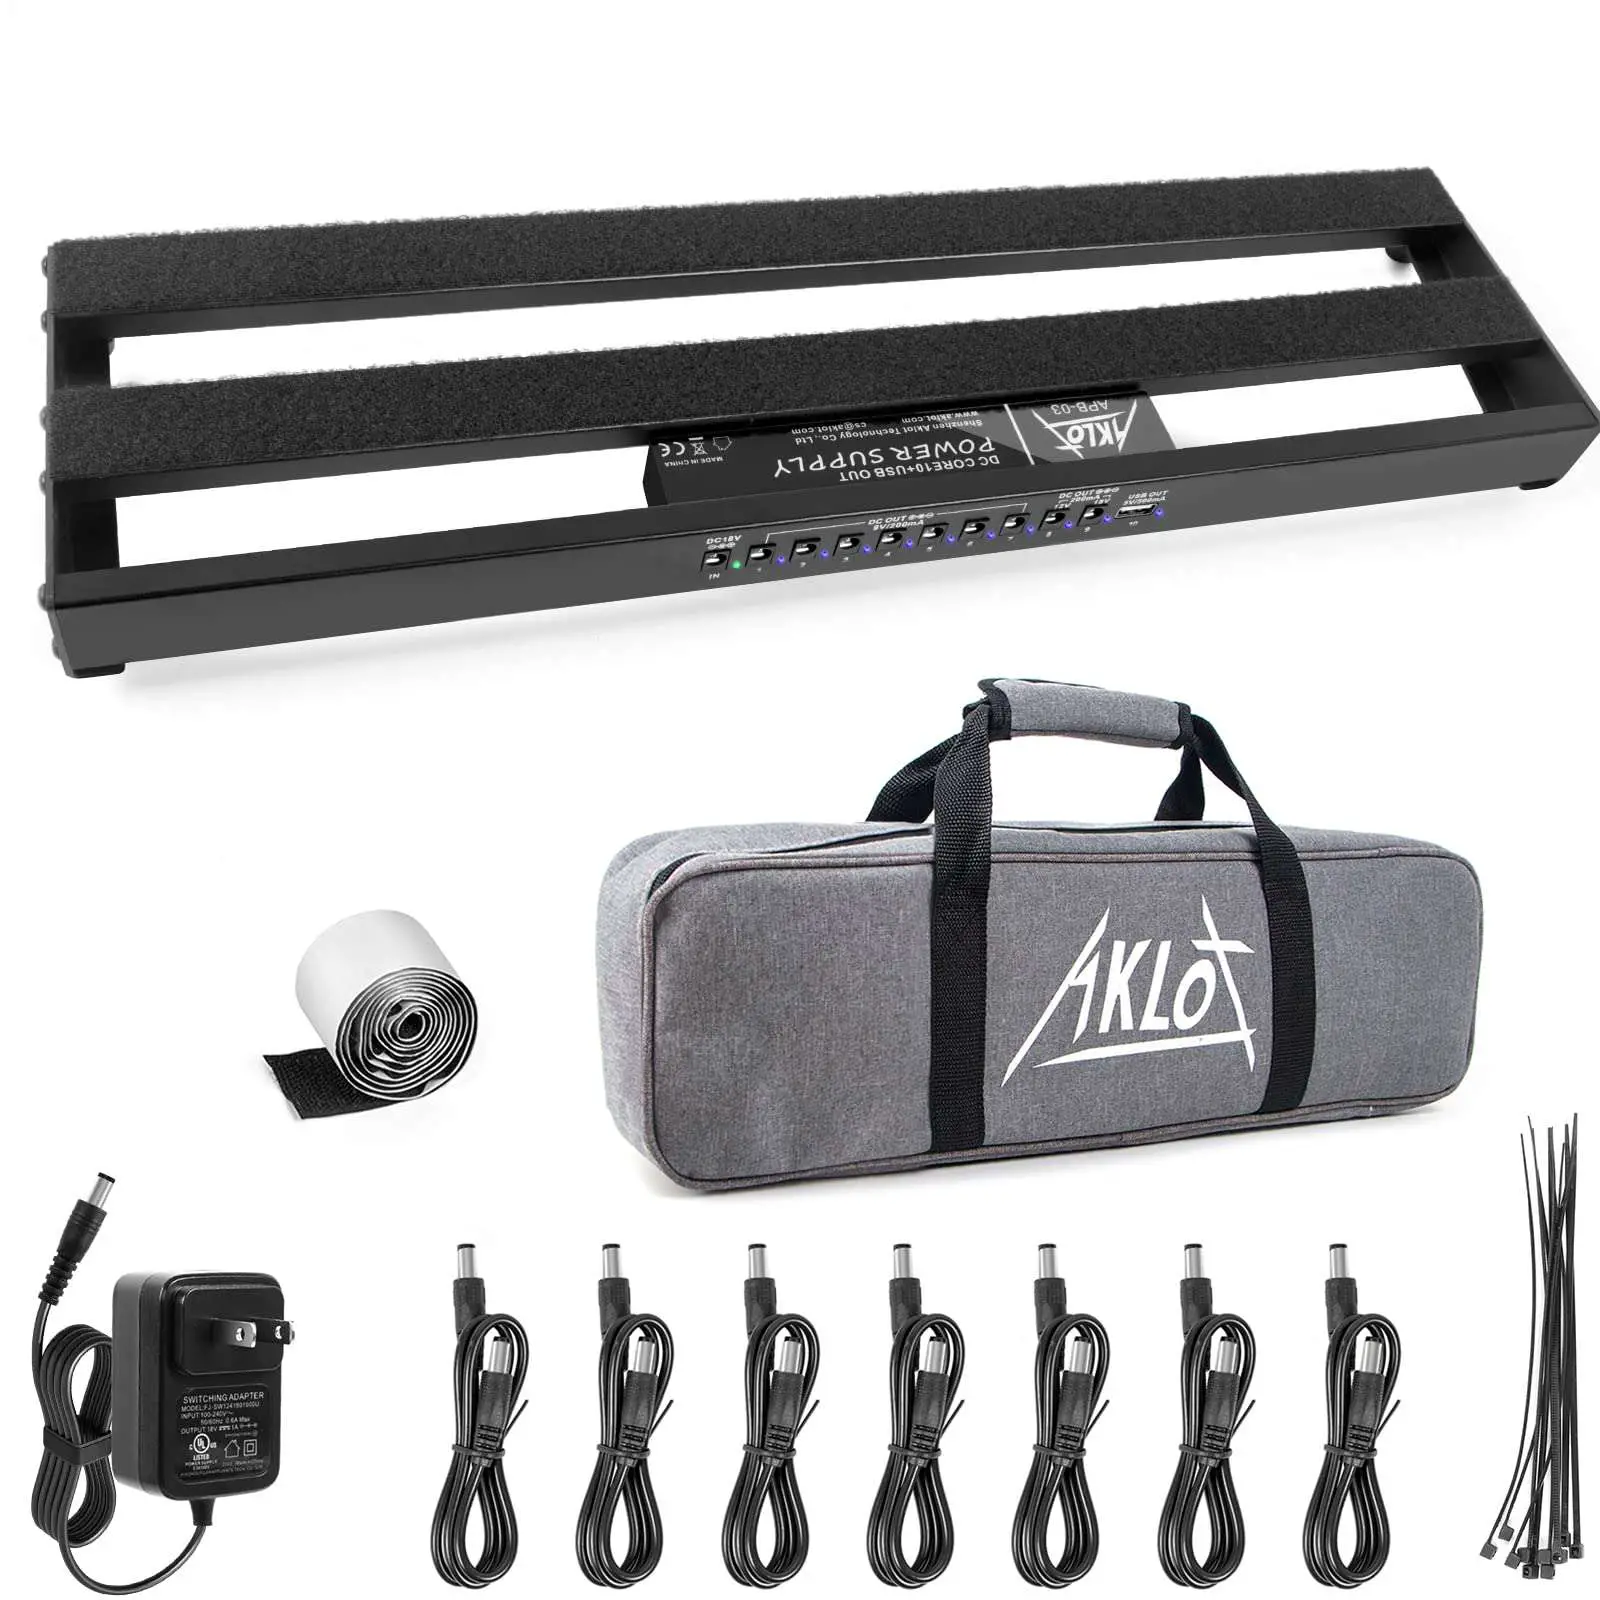 AKLOT Guitar Pedal Board with Built-in Power Supply